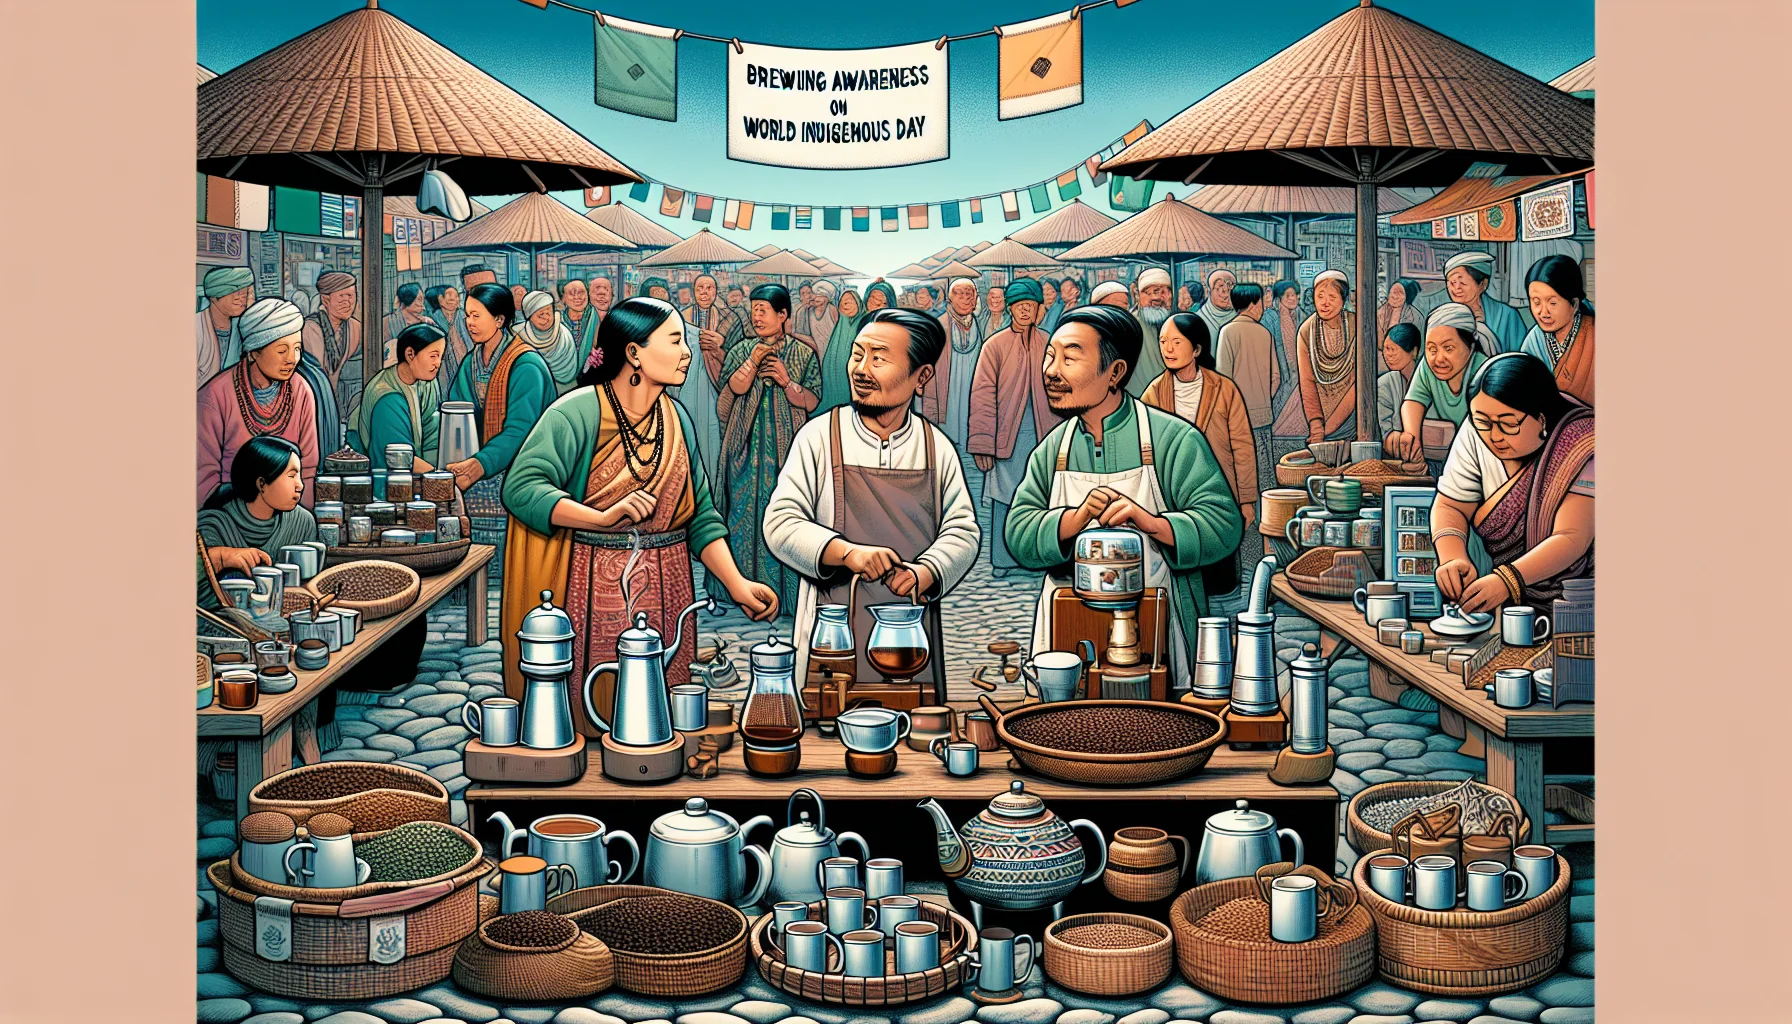 Generate an engaging and humorous scene for World Indigenous Day awareness. The scene should take place in a busy marketplace showcasing stalls selling a variety of tea and coffee brewing products. Detailed illustrations of various brewing apparatus such as teapots, coffee makers, mugs, and different varieties of tea leaves and coffee beans should be displayed. In the middle of the scene, a South Asian woman and a Caucasian man, both portraying shopkeepers, engage in a friendly brewing competition which amuses the diverse crowd gathered around them. The crowd should include people of different genders and descents. Include a banner floating in the sky with the text 'Brewing Awareness on World Indigenous Day'. The overall vibe should be vibrant, fun and culturally rich